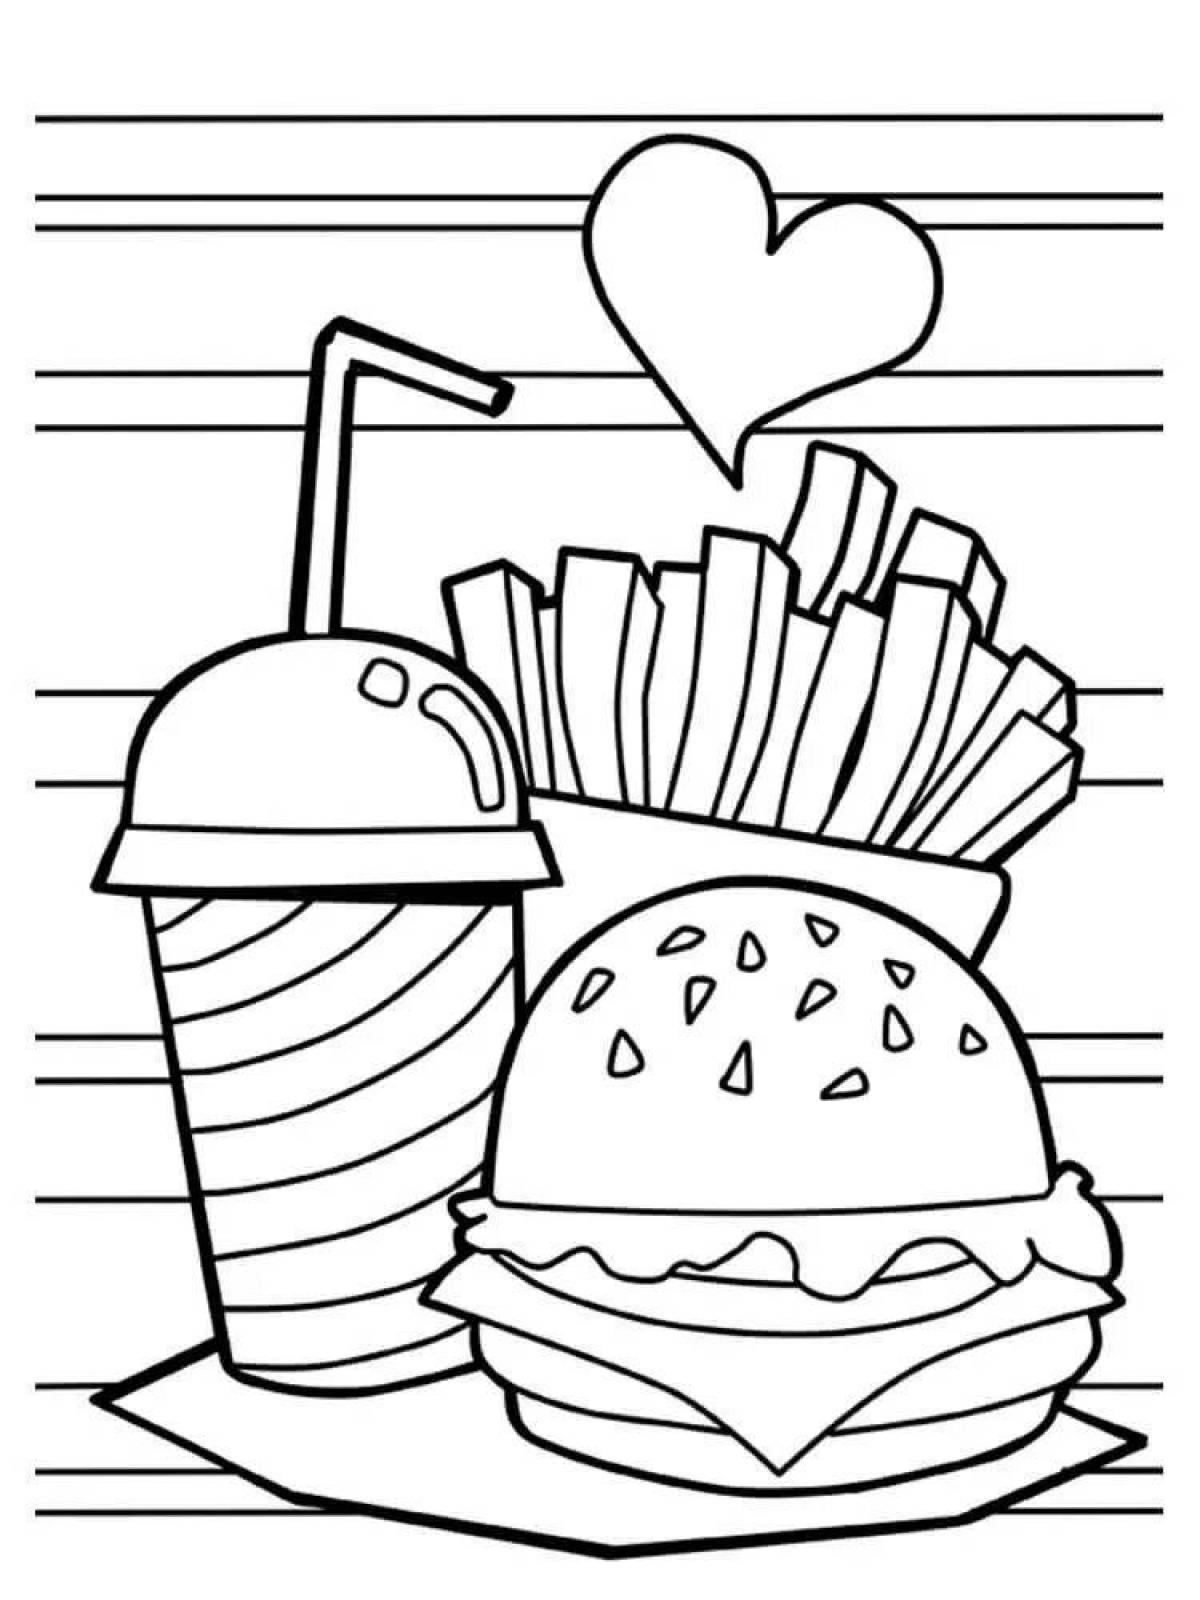 Amazing burger king coloring page